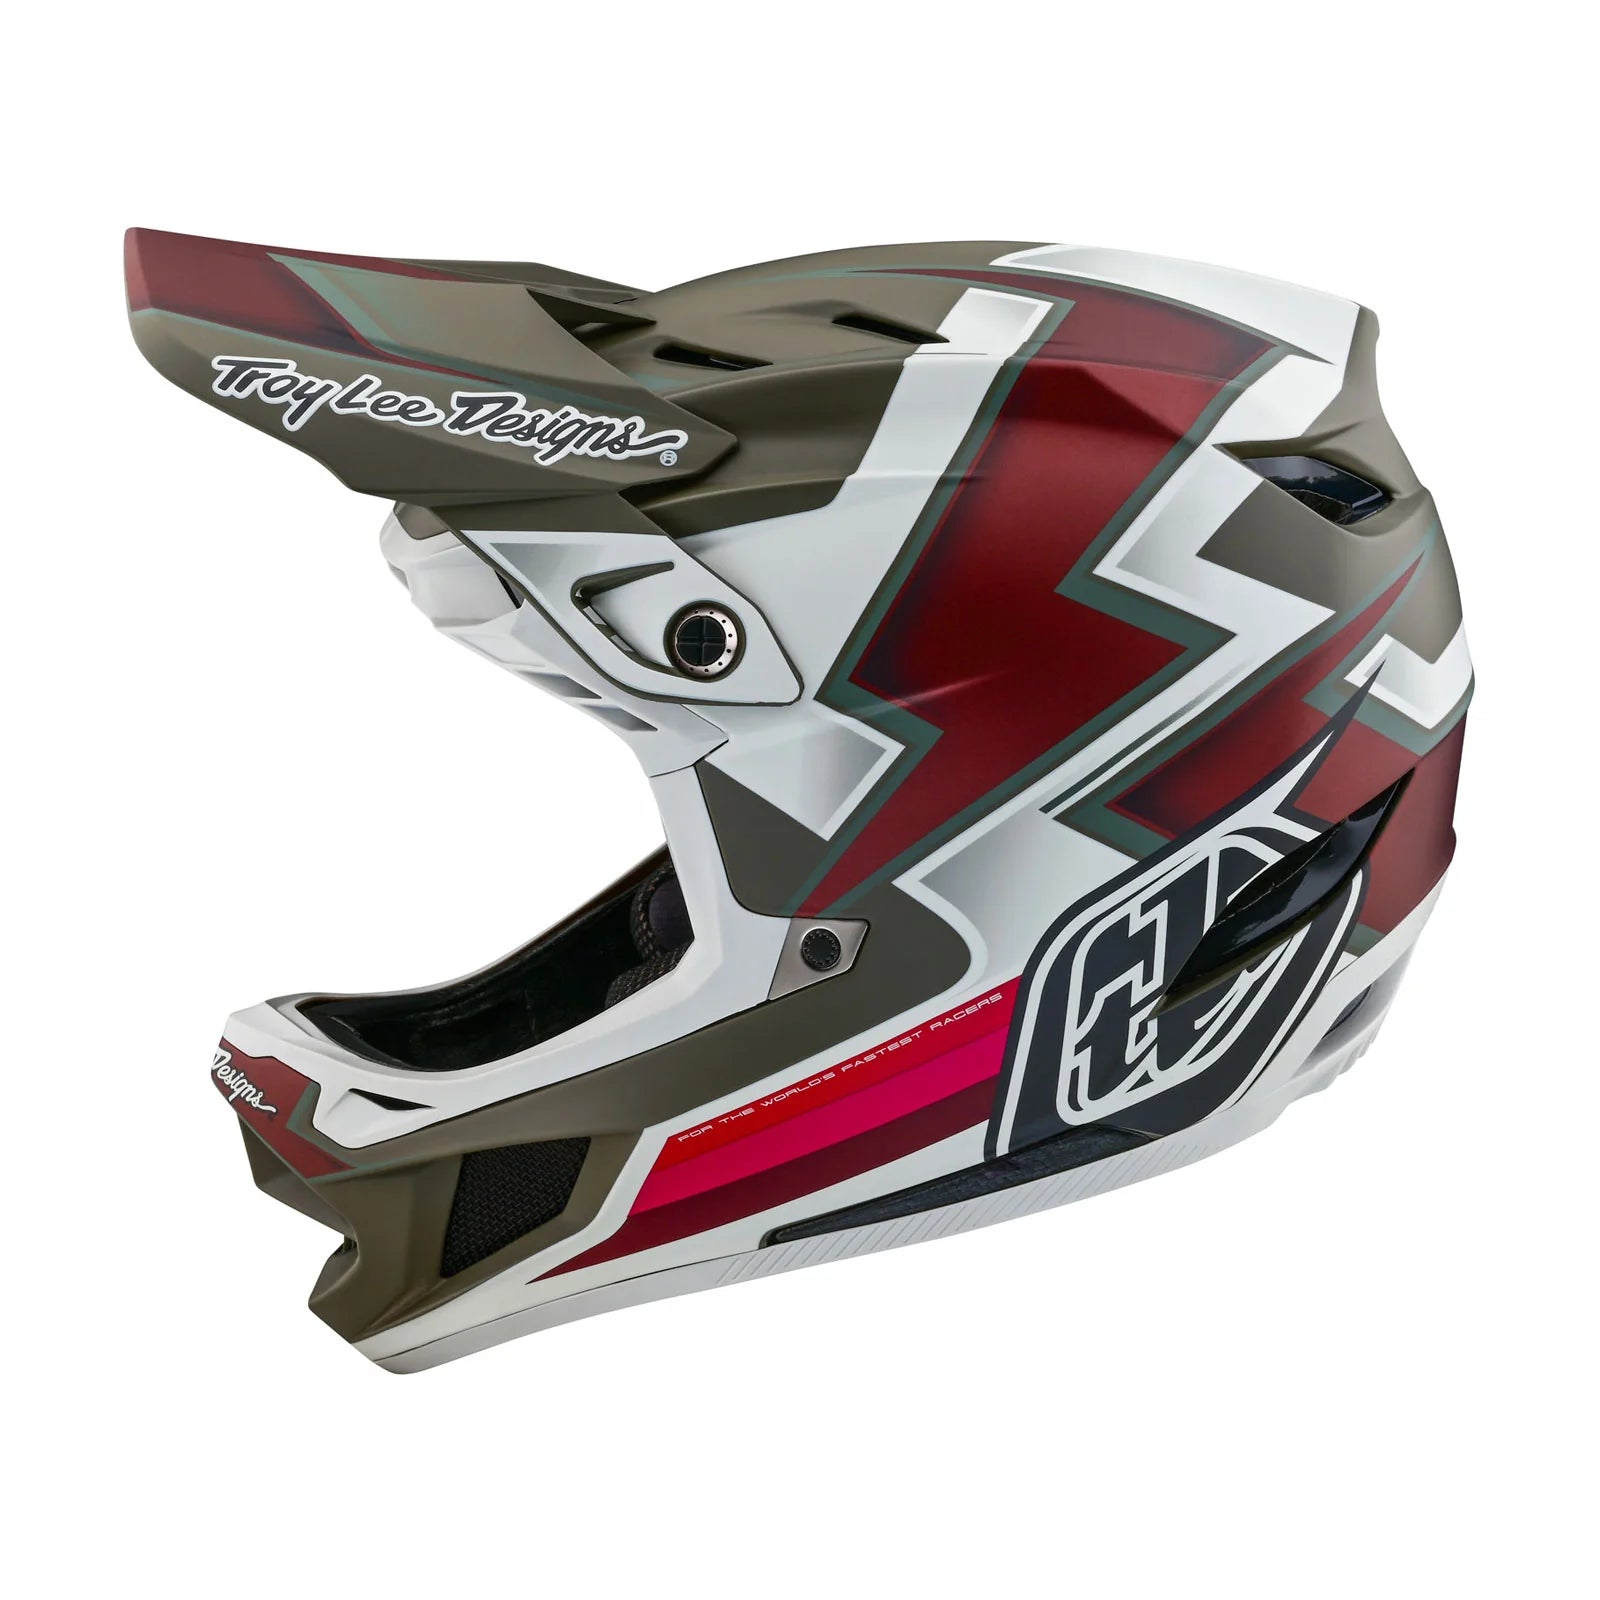 A TLD D4 AS Composite Helmet W/MIPS Ever Tarmac with a red and white design featuring the Mips C2 protection system.